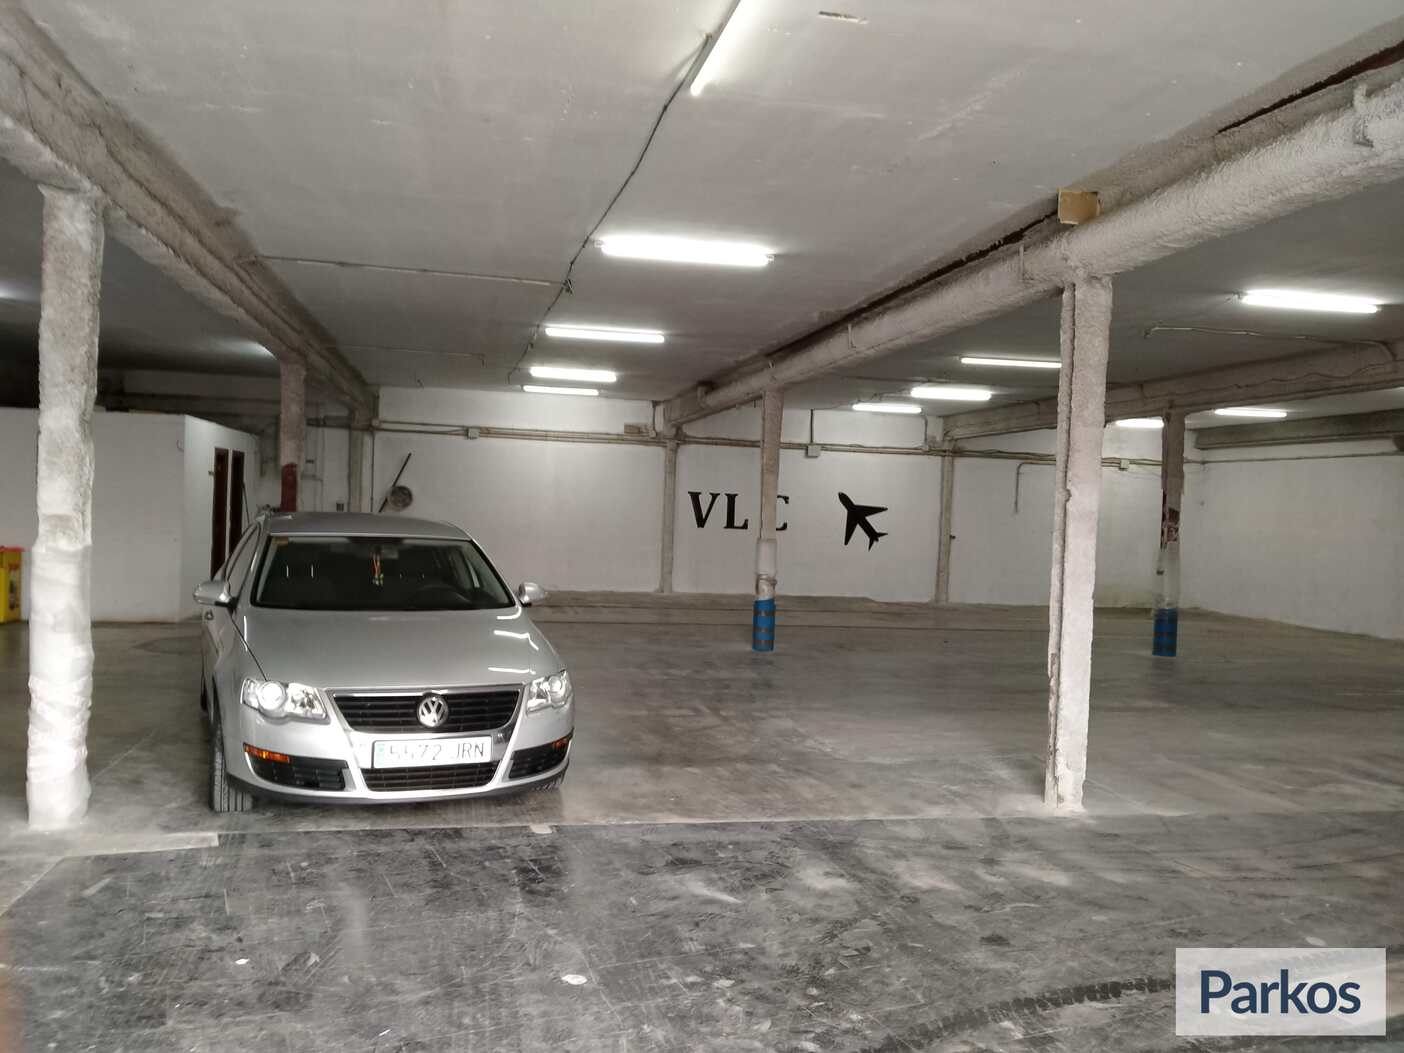 V.L.C Low Cost Parking (Paga online) - Parking Aeropuerto Valencia - picture 1